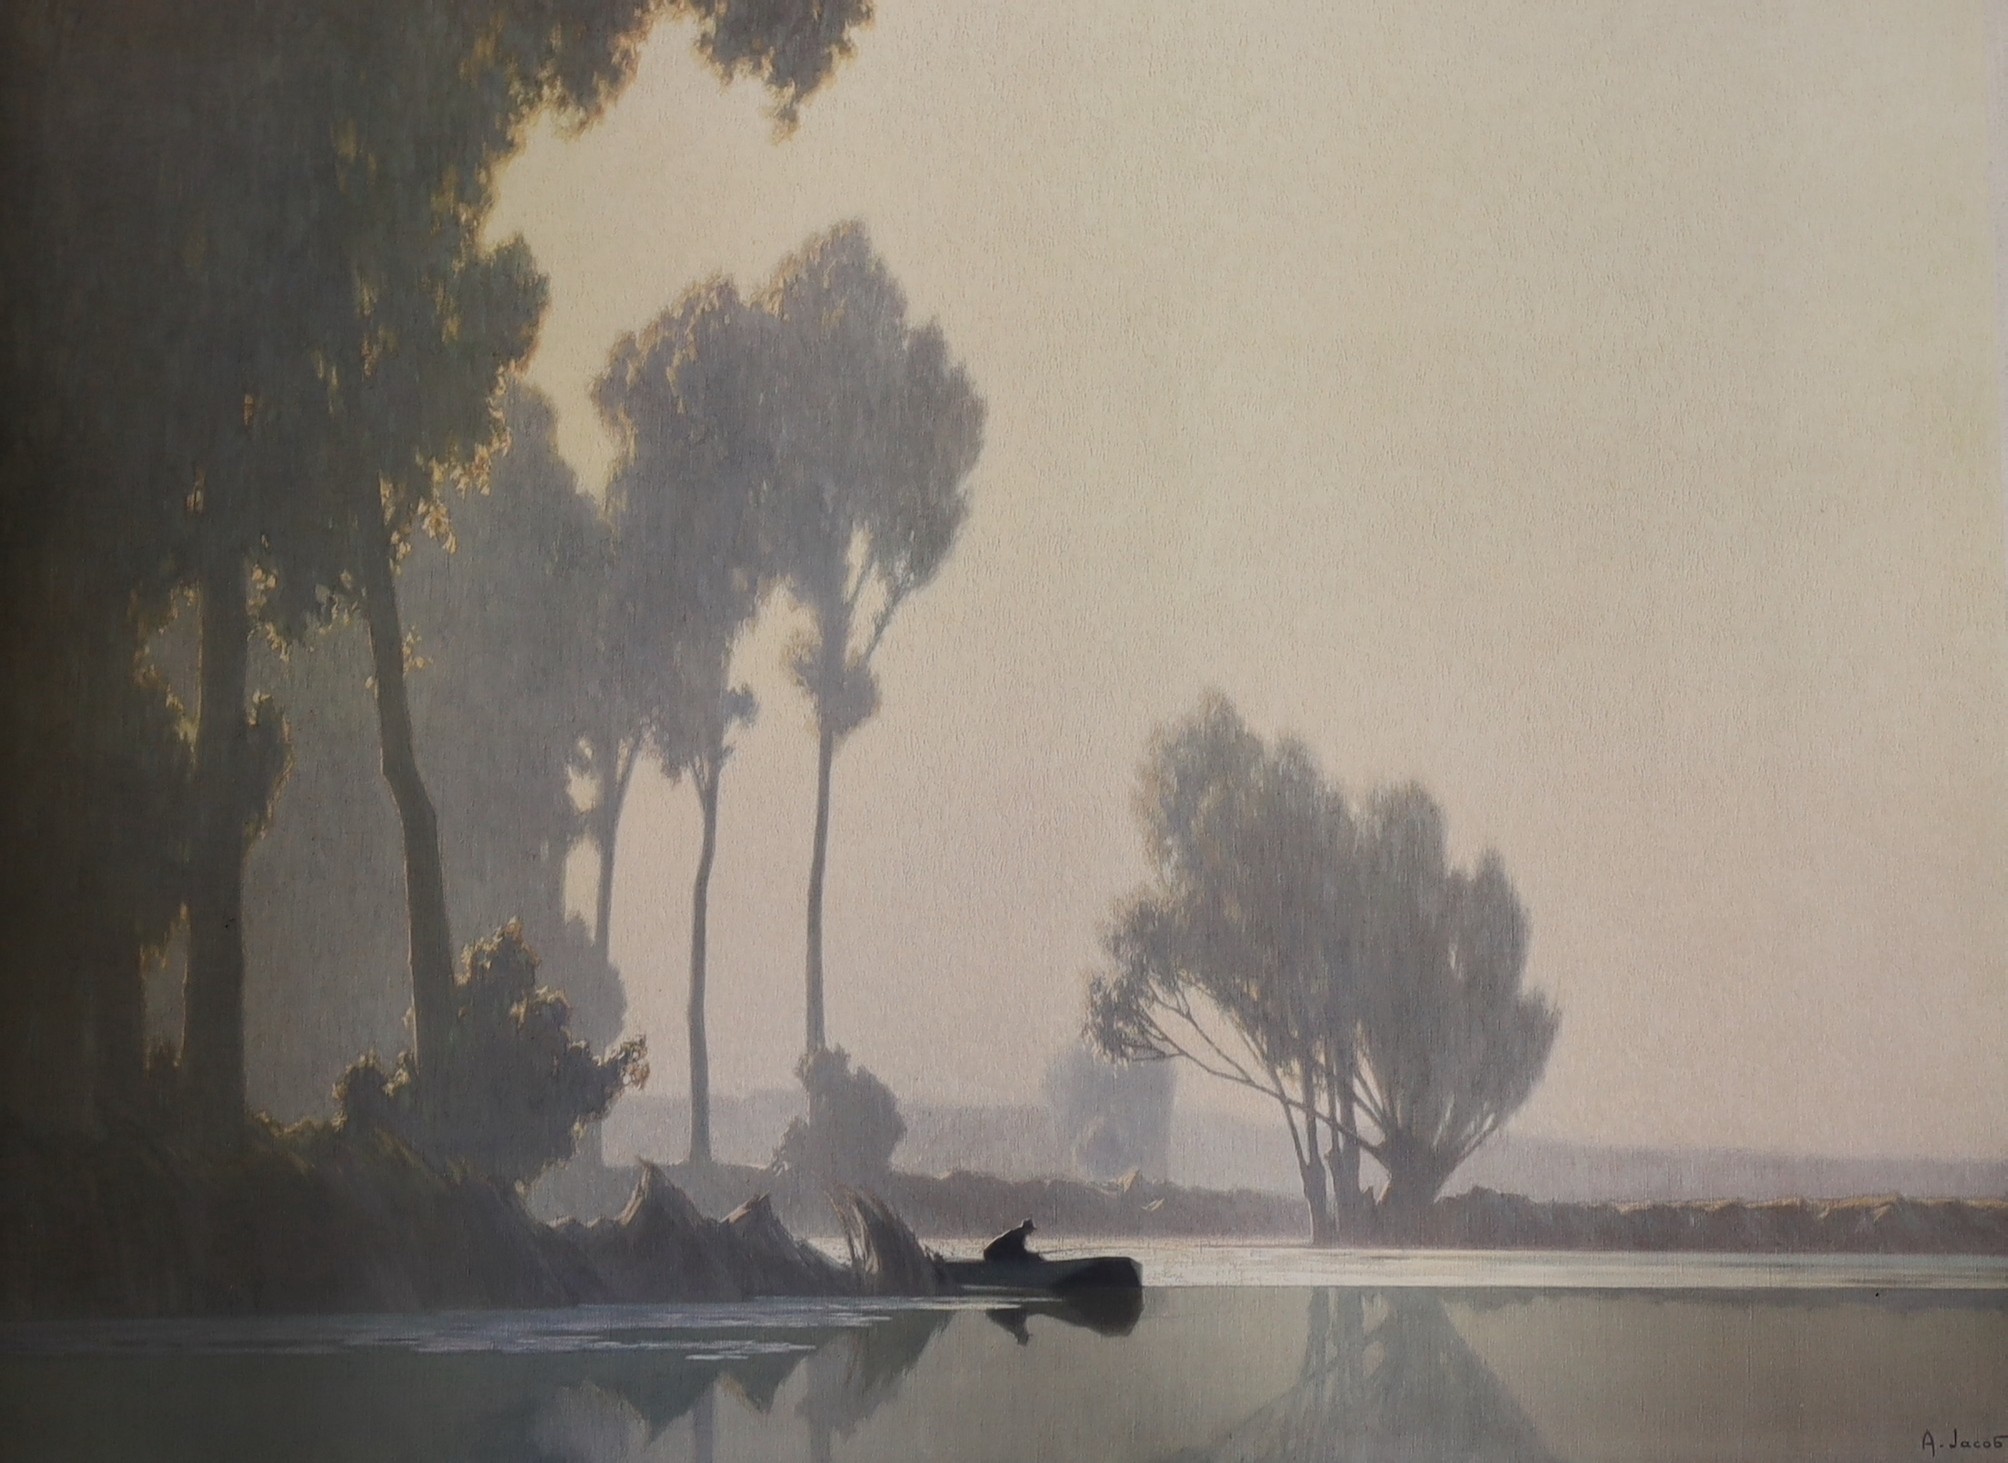 Alexandre Jacob, colour print, Lake scene, signed in the margin, published by Frost and Reed, 66 x 84cm